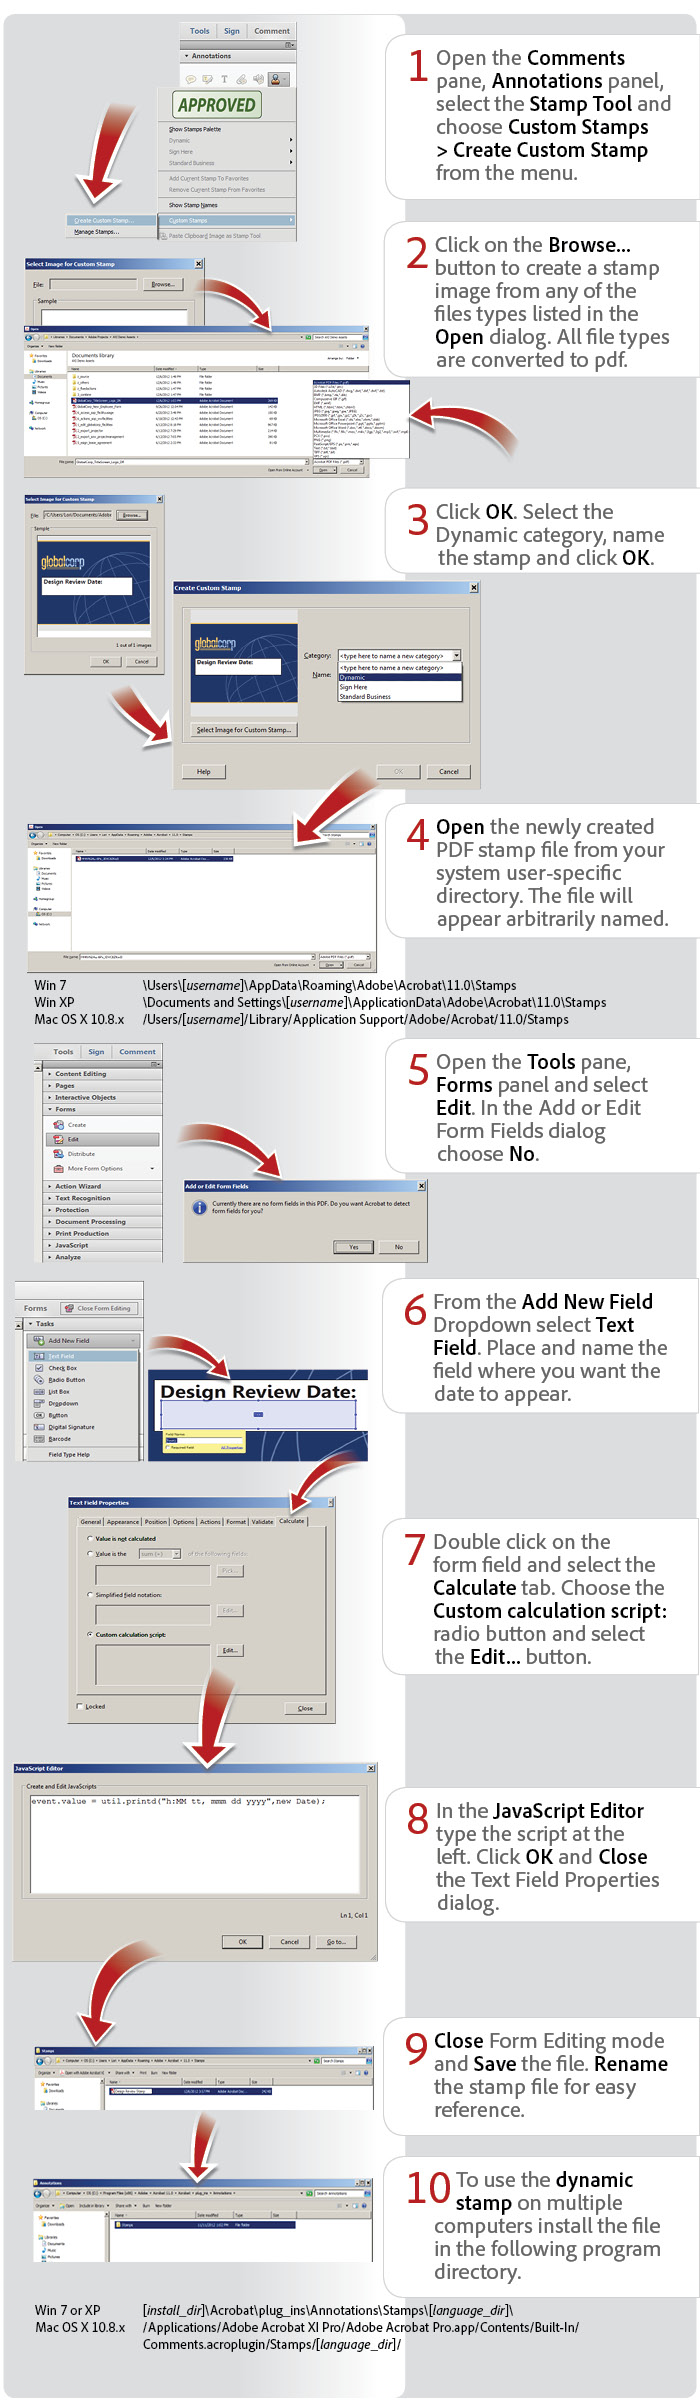 How To Do A PDF Review Document Review Using Acrobat Adobe Acrobat